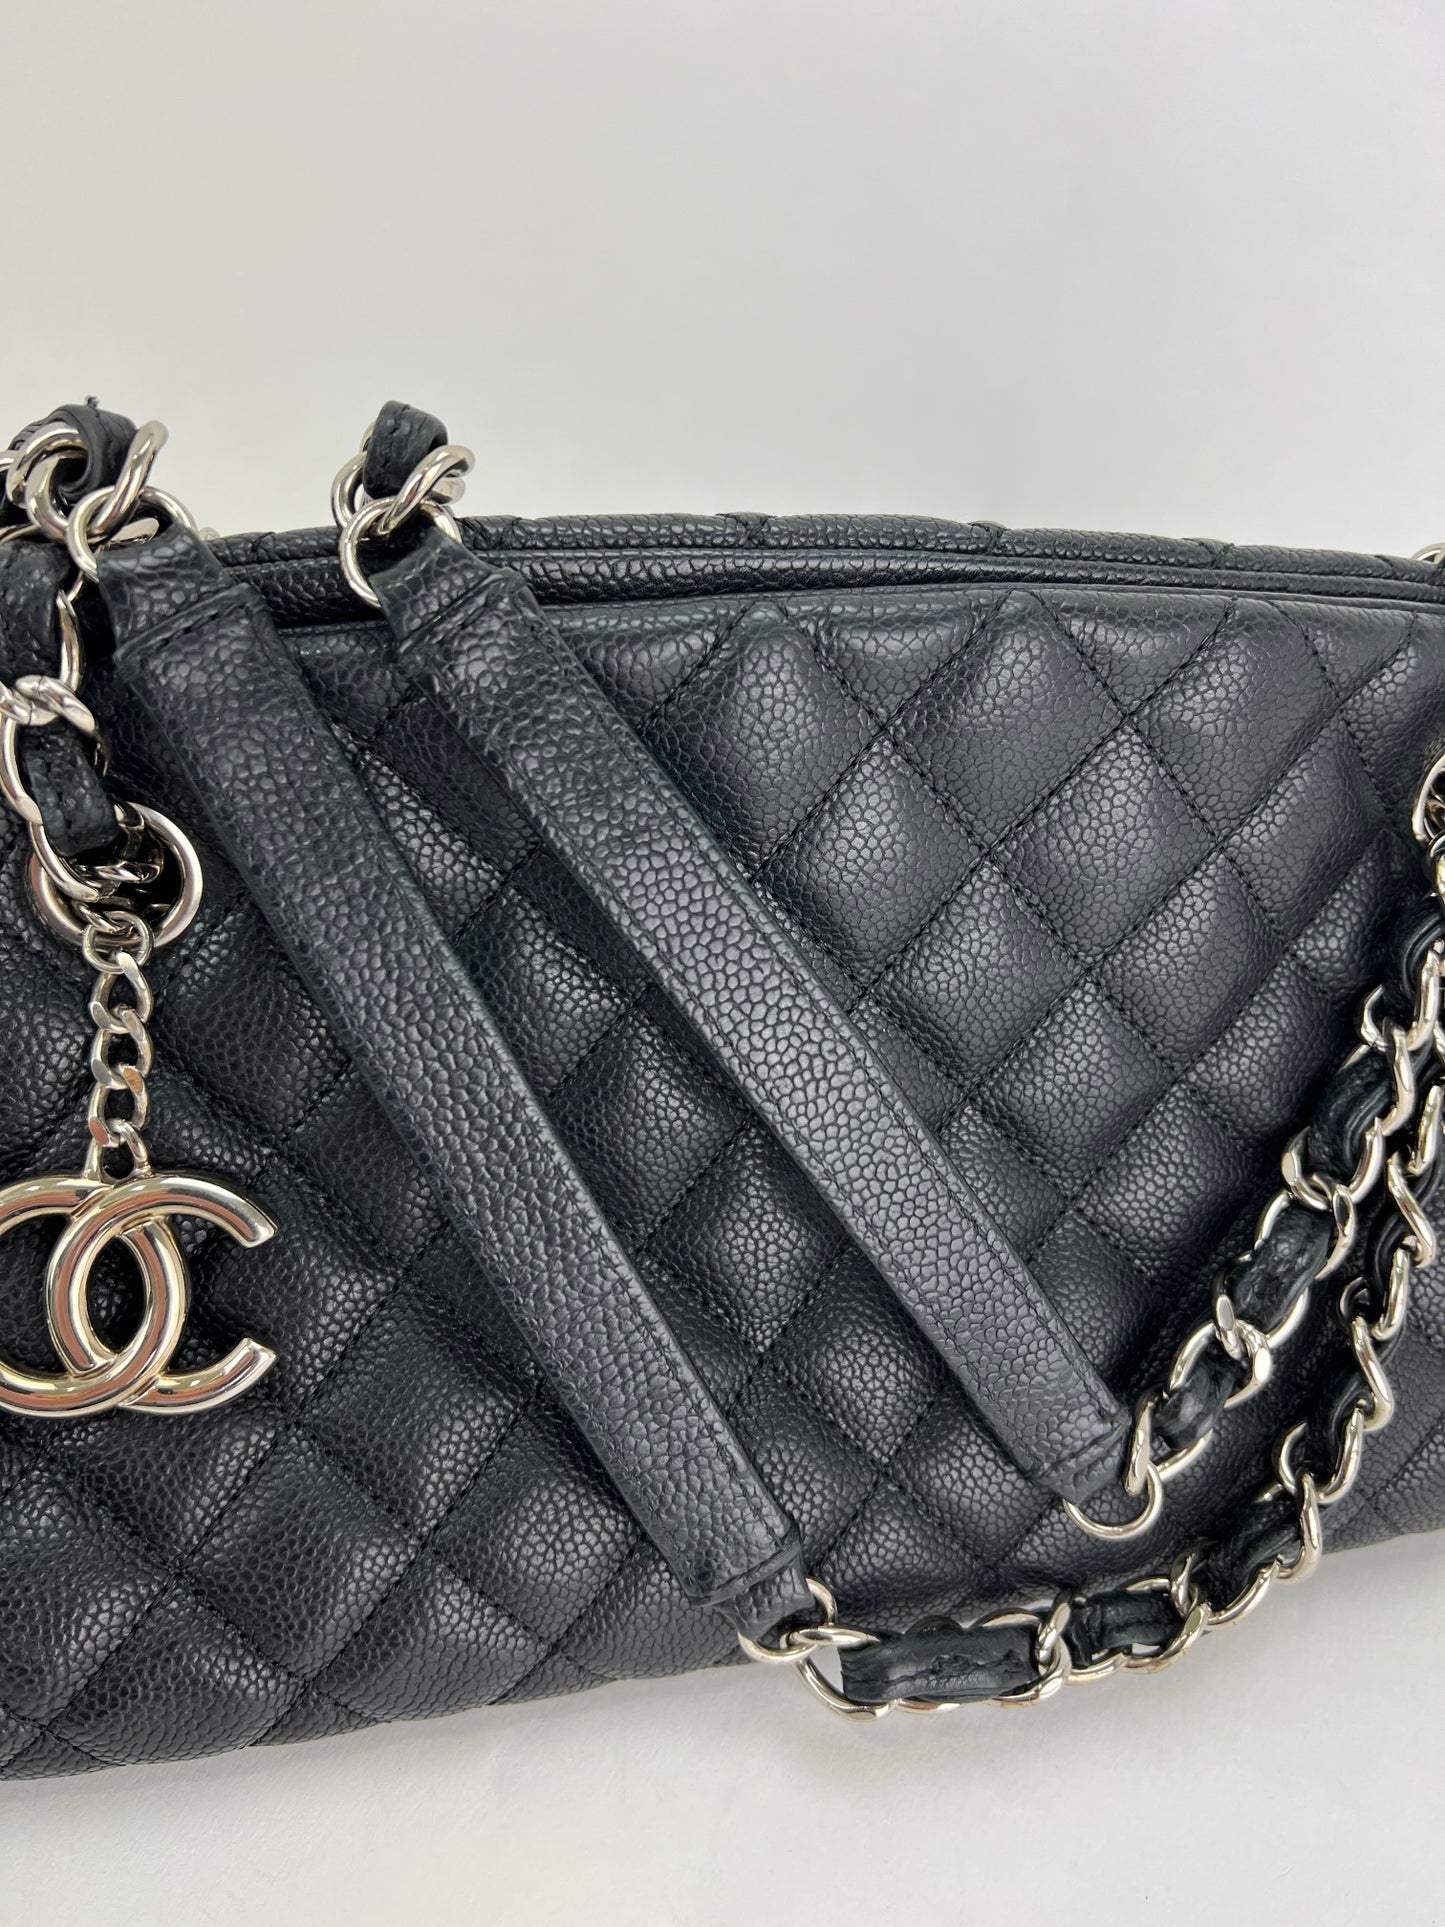 chanel tote bag brown new